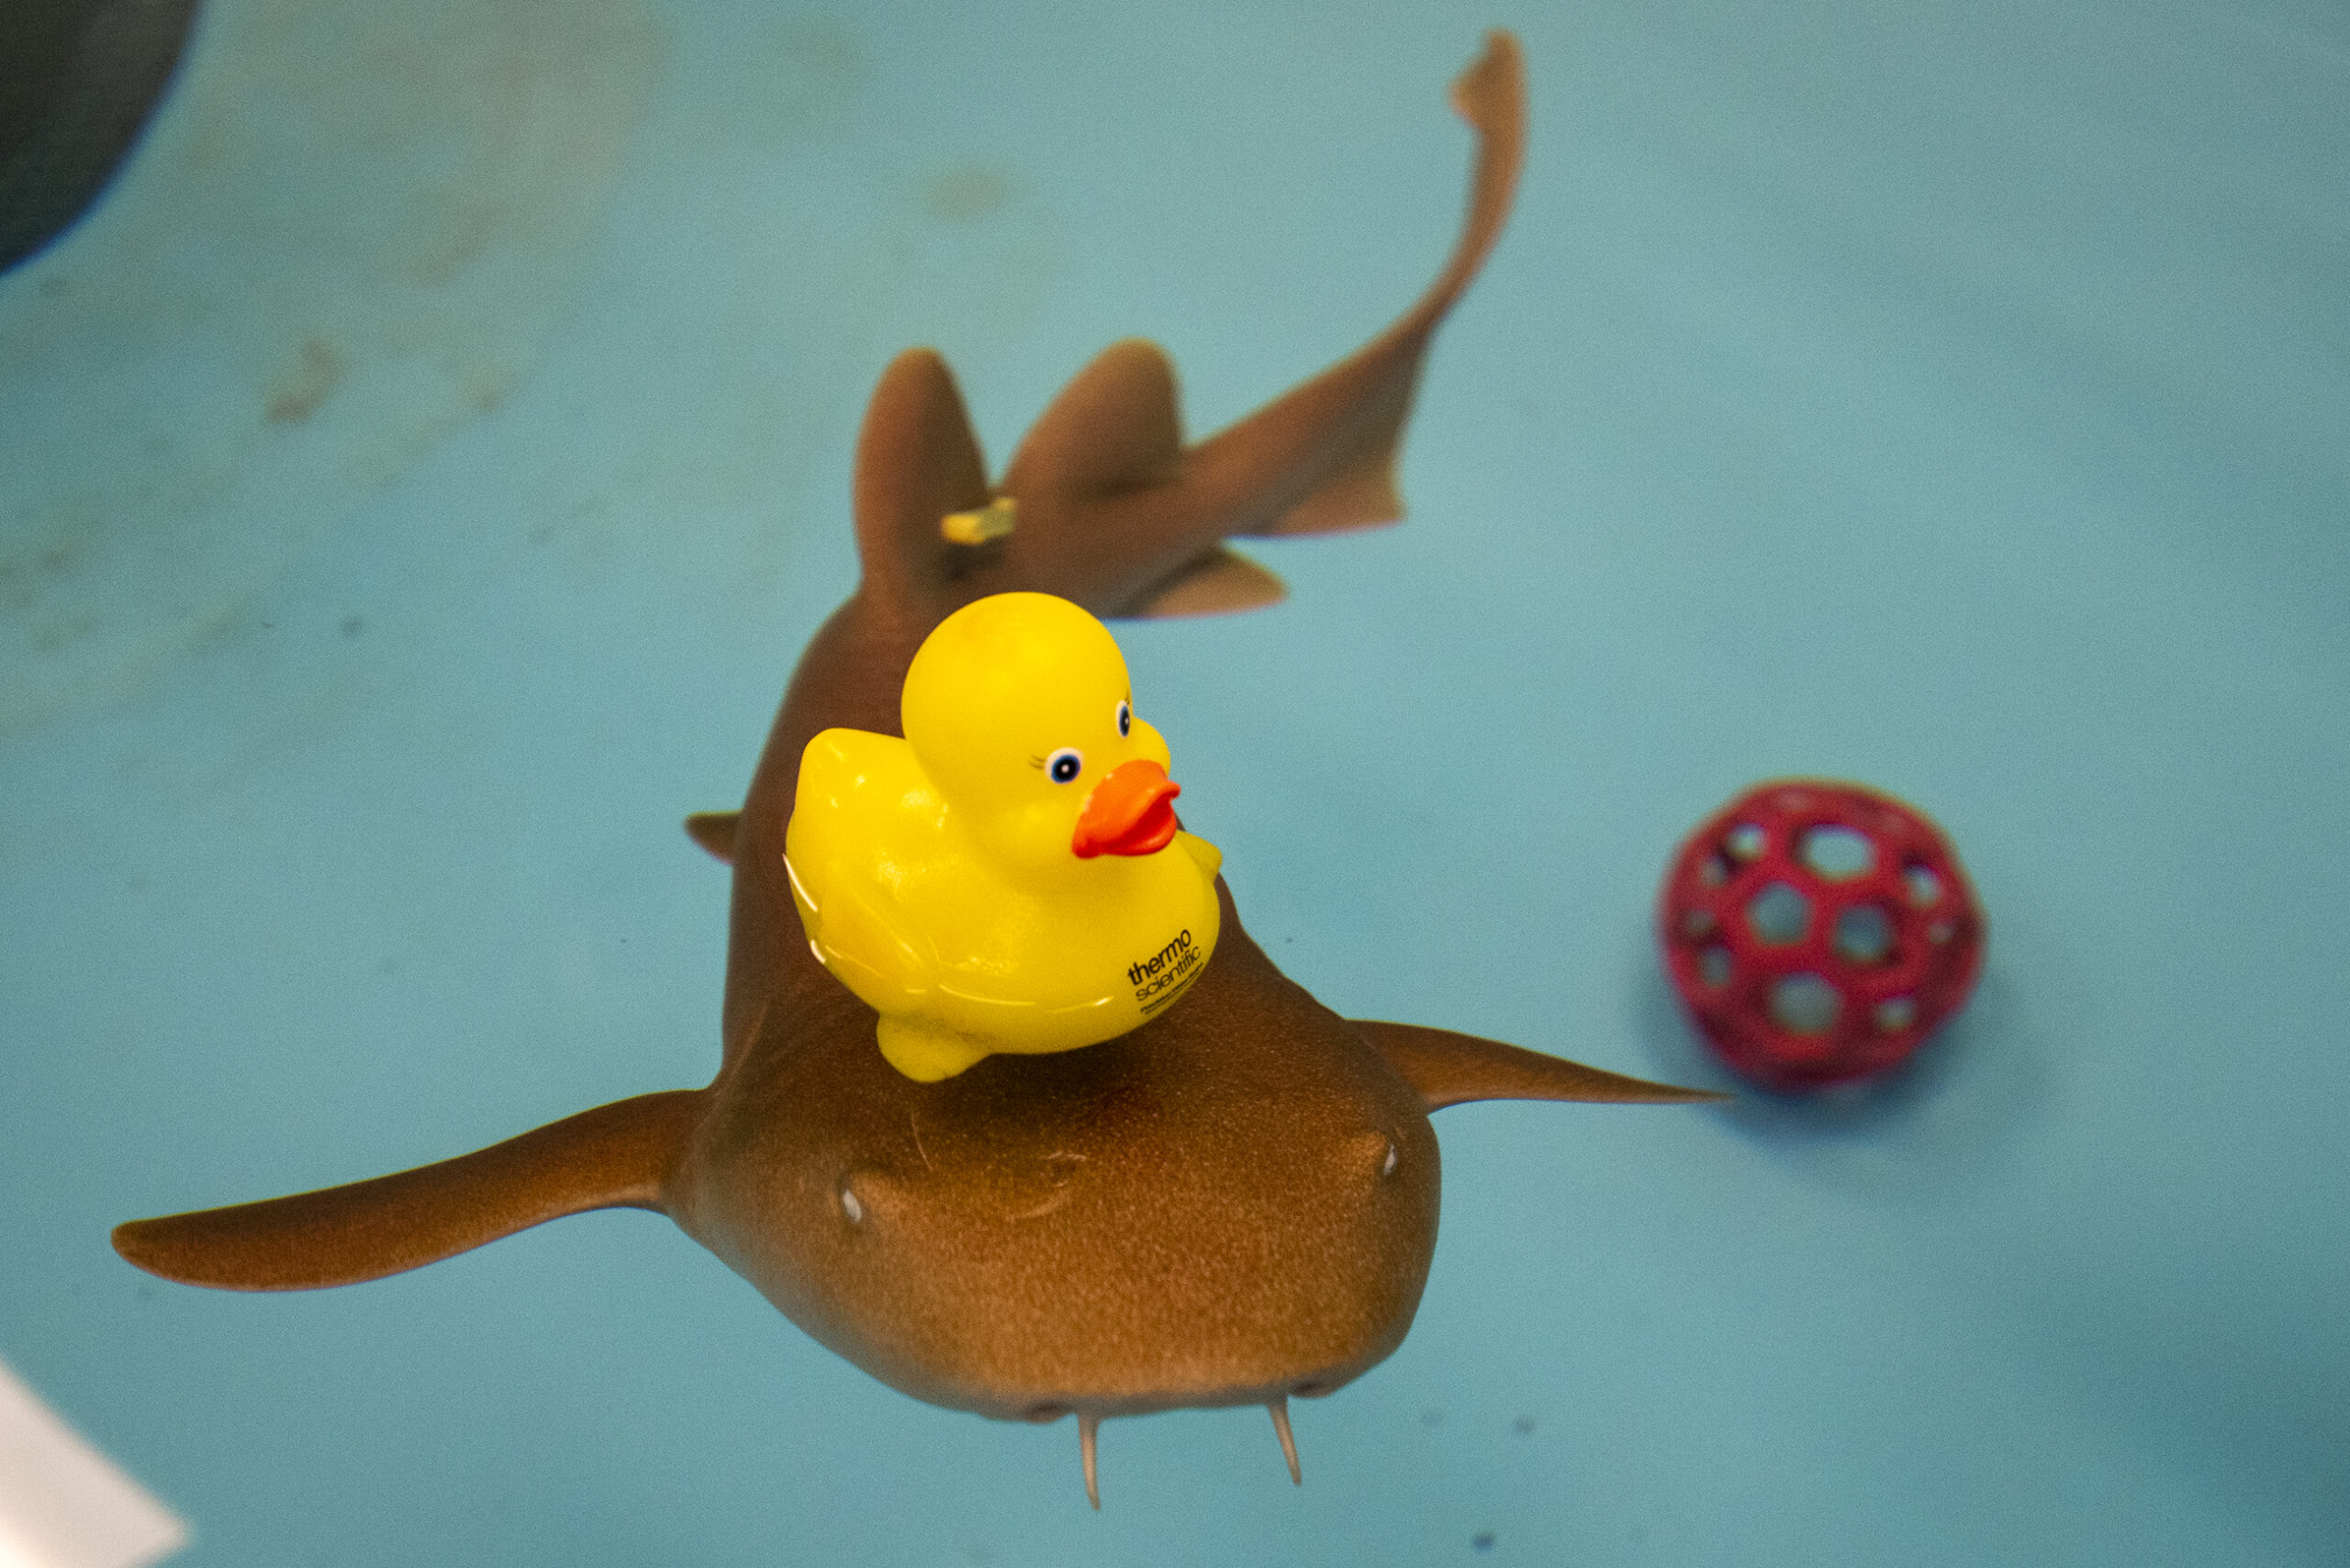 A shark swims underneath a yellow rubber ducky toy.